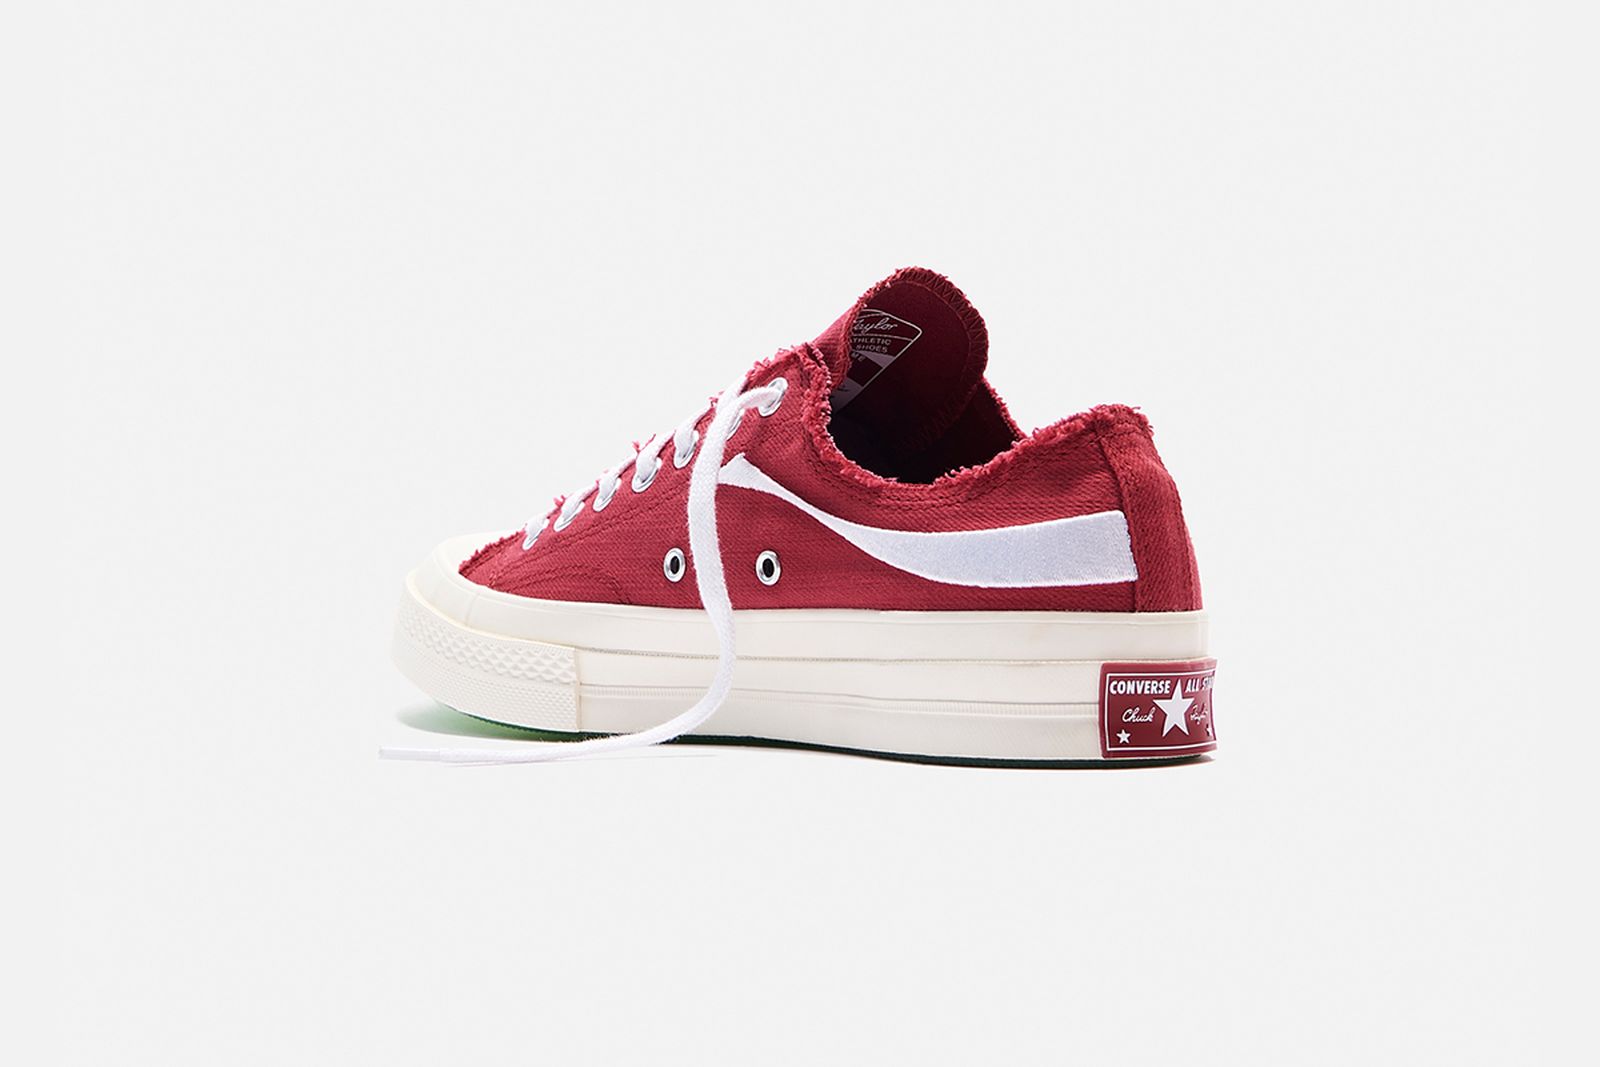 Kith x Coca-Cola x Converse Chuck Taylor: Official Images & Info